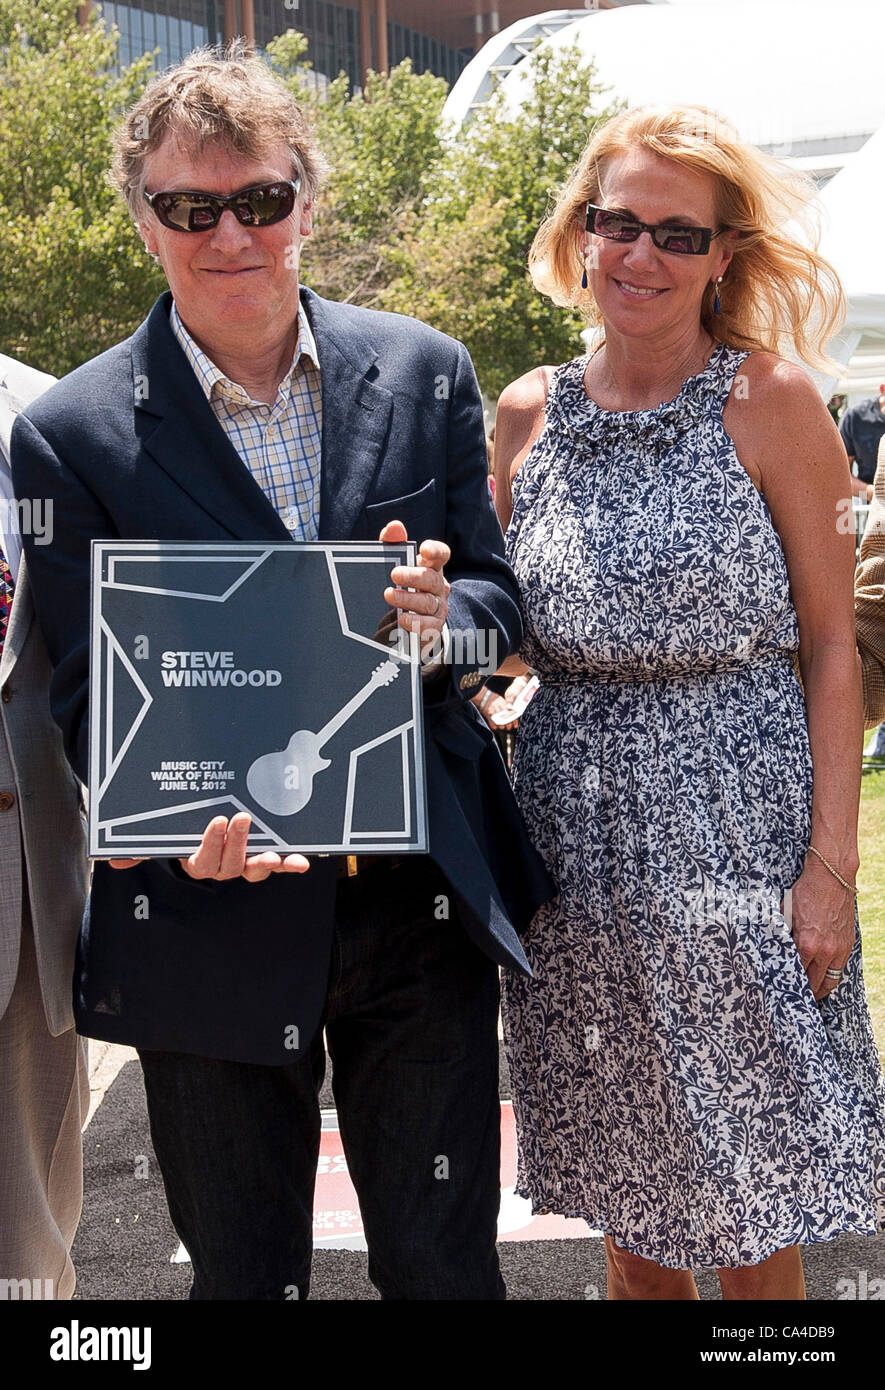 Jun 5, 2012 - Nashville, Tennessee; USA - Musician STEVE WINWOOD and his wife EUGENIA WINWOOD is inducted into the Music City Walk of Fame that is located in Downtown Nashville.  Copyright 2012 Jason Moore. (Credit Image: © Jason Moore/ZUMAPRESS.com) Stock Photo